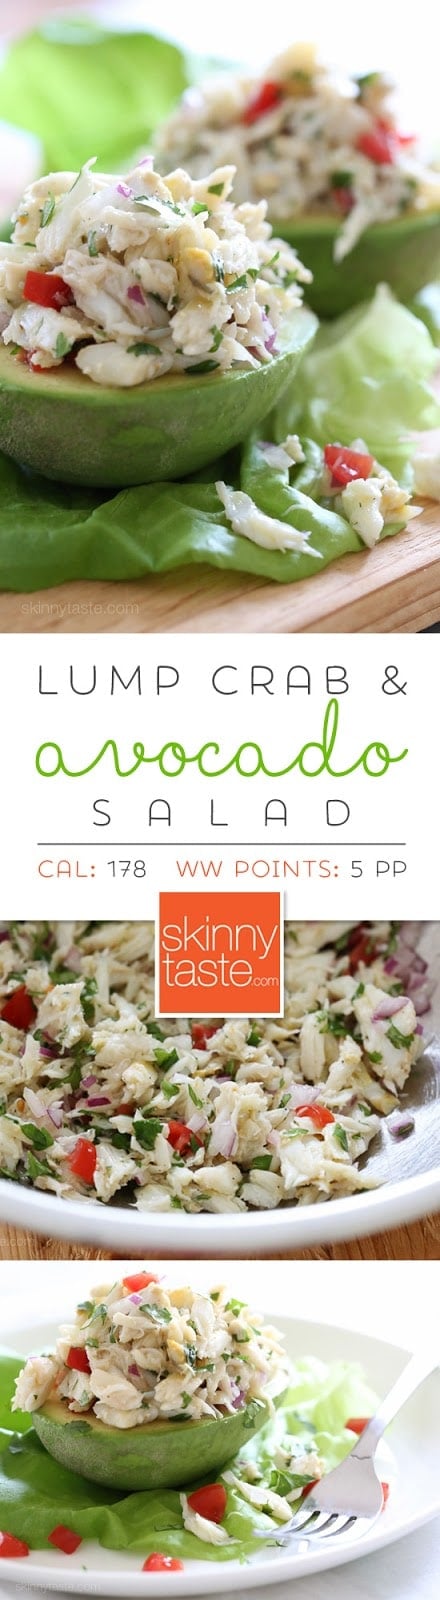 Avocado and Lump Crab Salad – avocado stuffed with a light, lump crab meat – the perfect summer low-carb salad! #glutenfree #whole30 #paleo #lowcarb